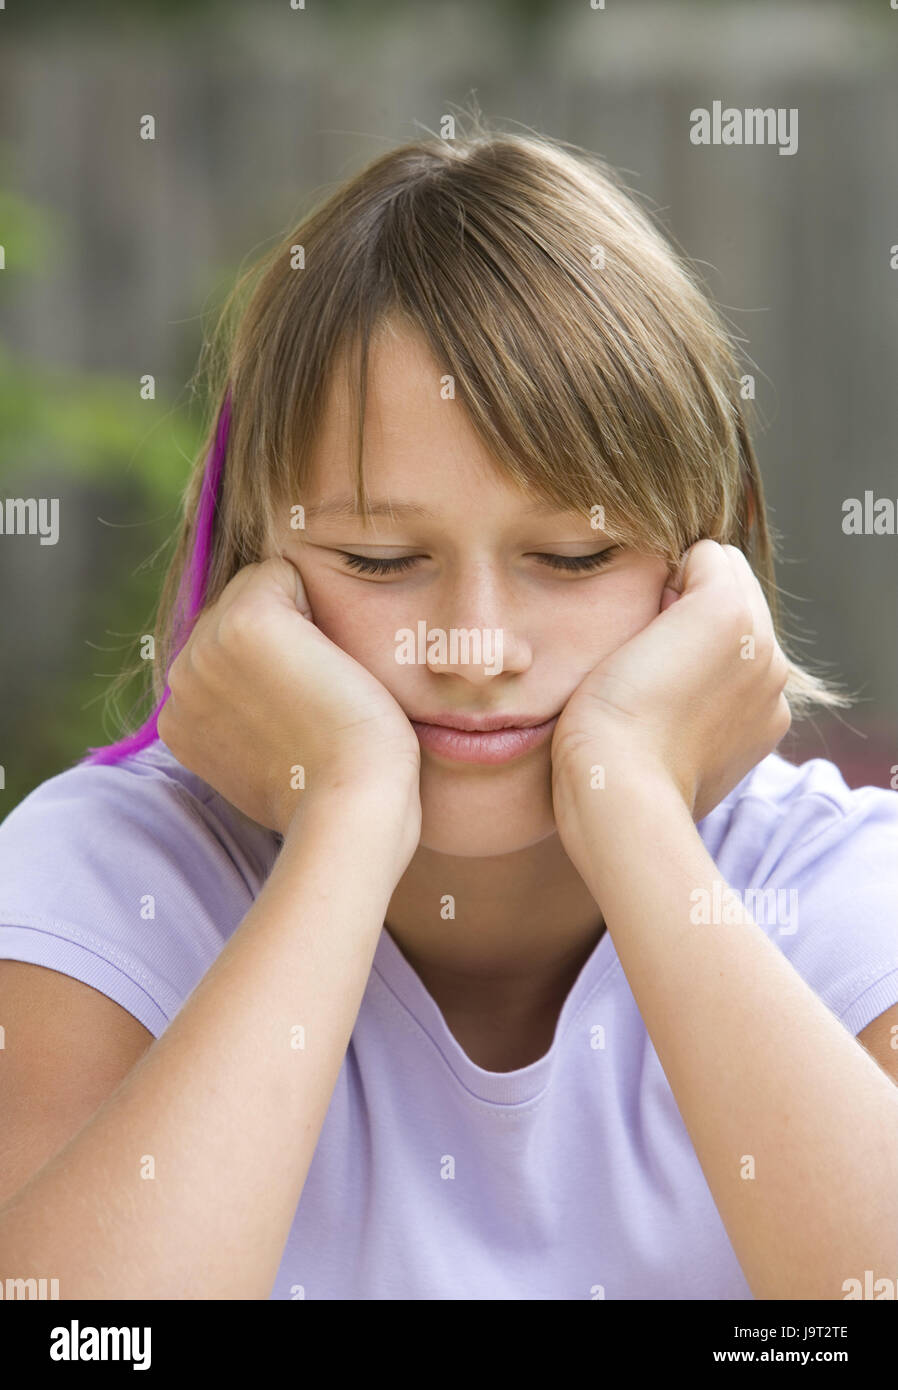 Girls,abgesützt,eyes closed,outside,young persons,teenagers,summer,added support,summery,young,brown-haired,strand,T-shirt,sleep,overfatigue,tiredly,exhausts,overtires, Stock Photo